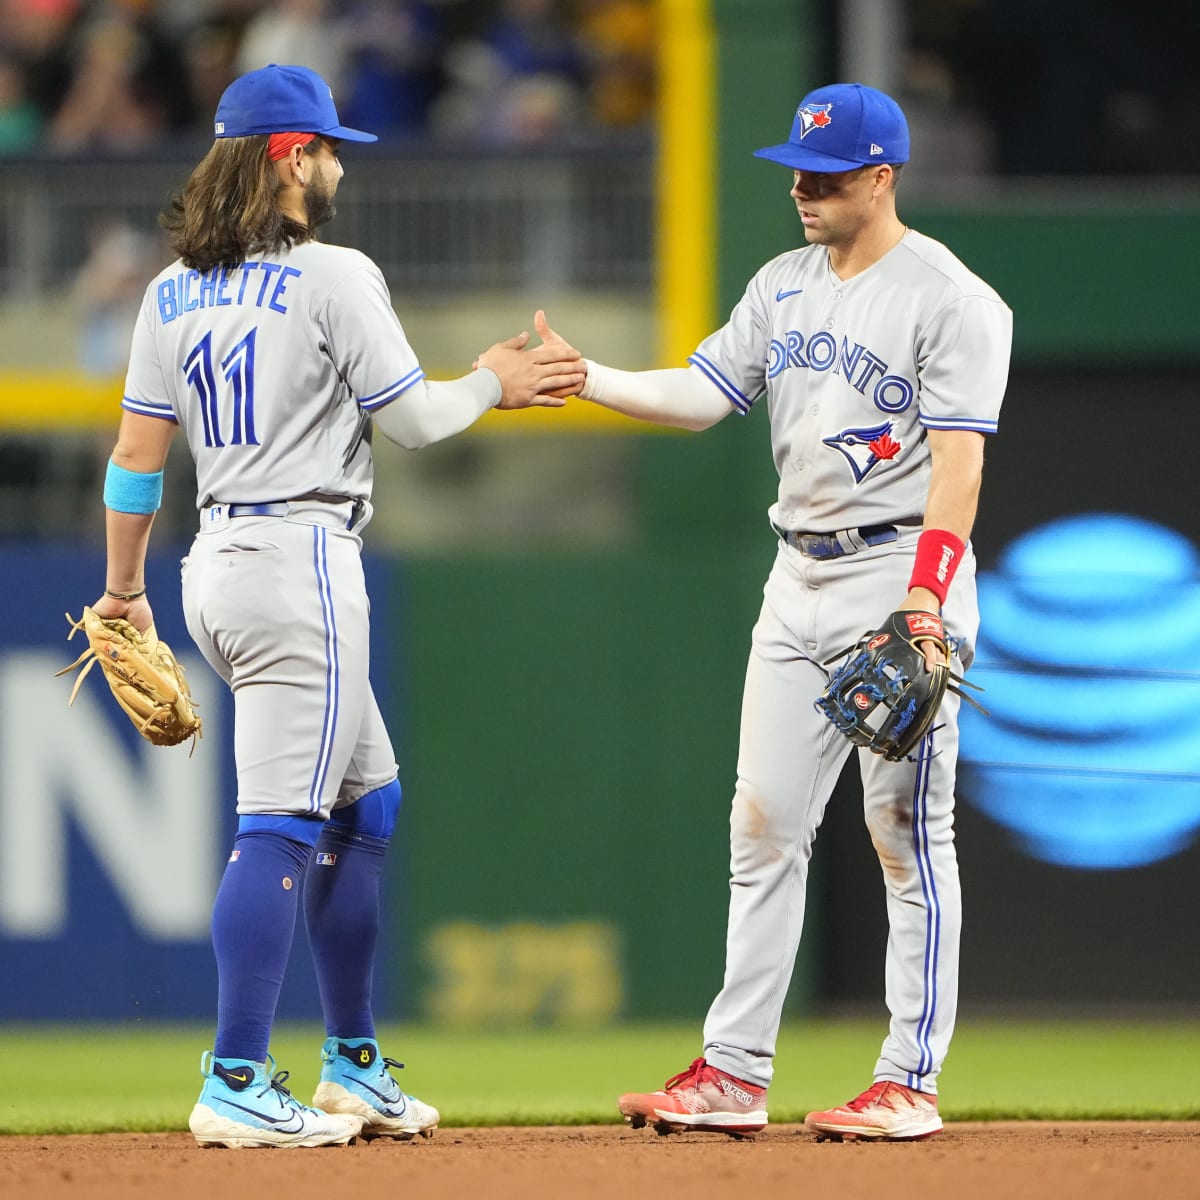 Varsho has 5 RBIs, Ryu gets first win since surgery as Jays avoid sweep,  beat Cubs 11-4